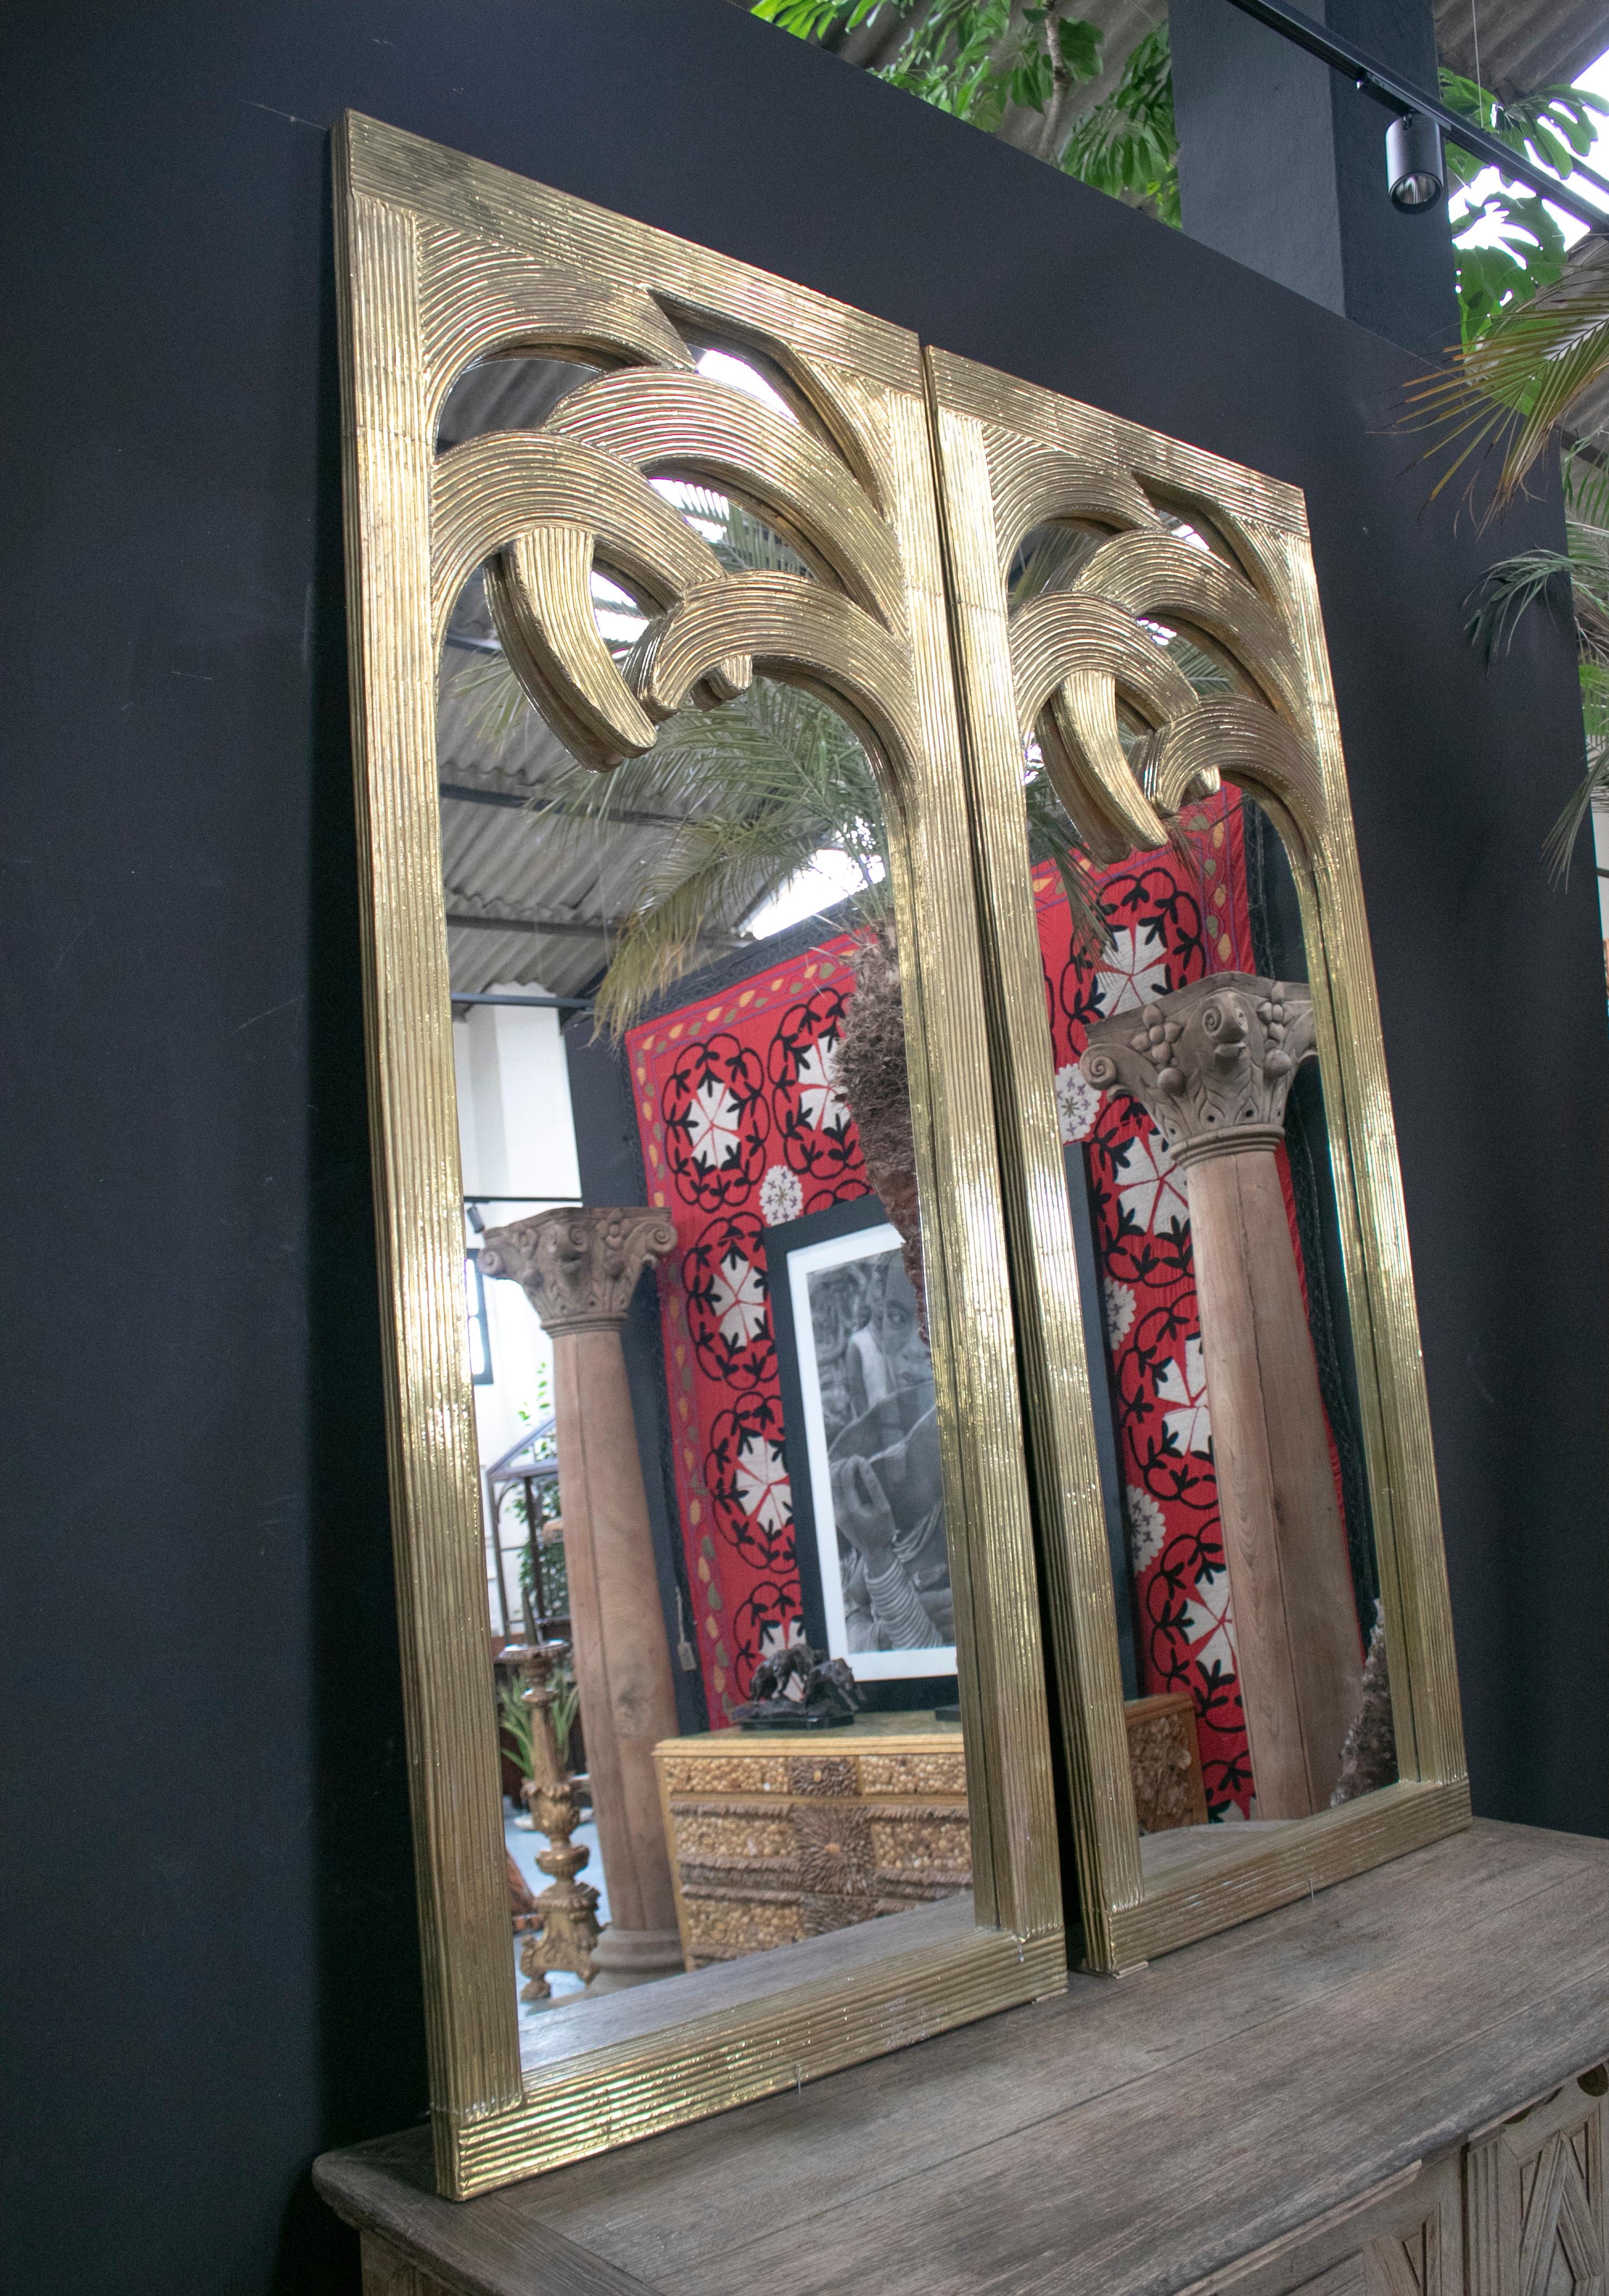 1980s Spanish pair of palm shaped bronze-plated wooden mirrors.

Dimensions each: 200 x 90 x 4 cm.